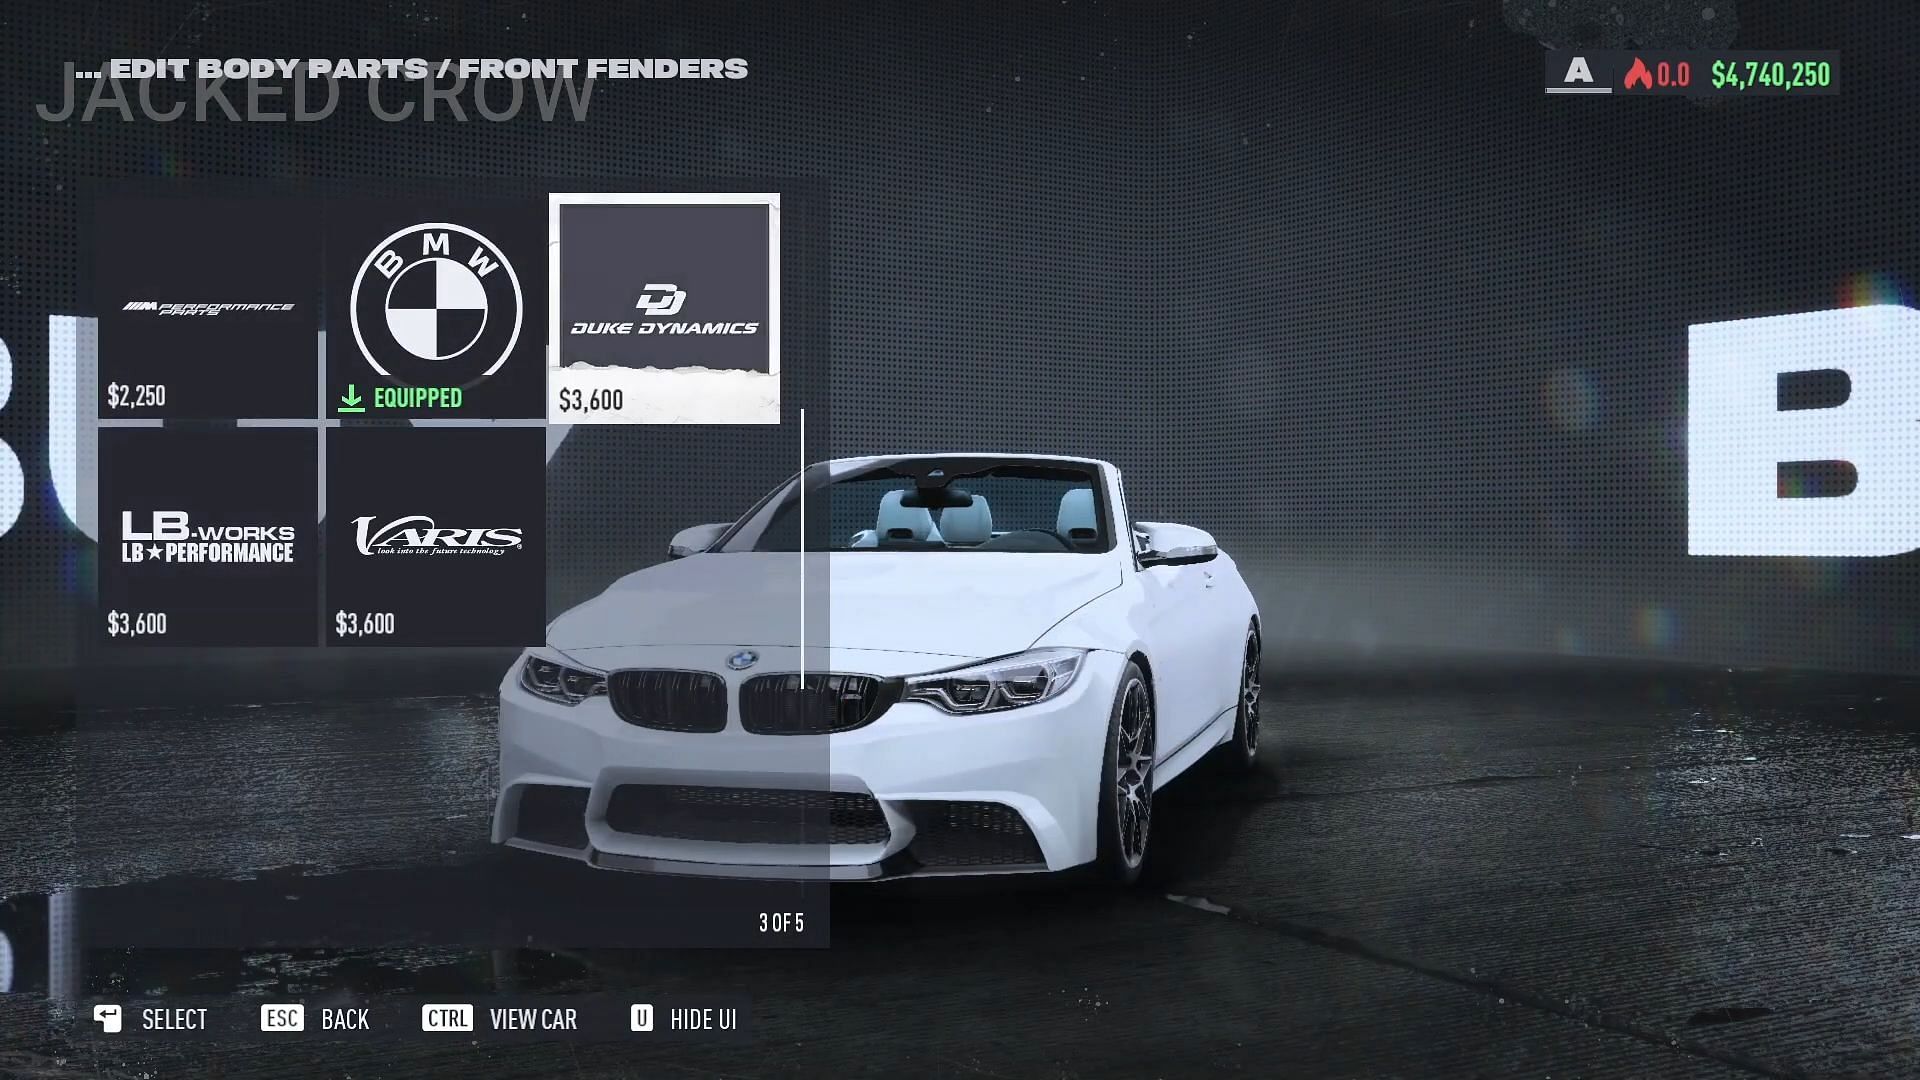 The BMW M4 Convertible (20170, inside the in-game customization menu (Image via YouTube/Jacked Crow)